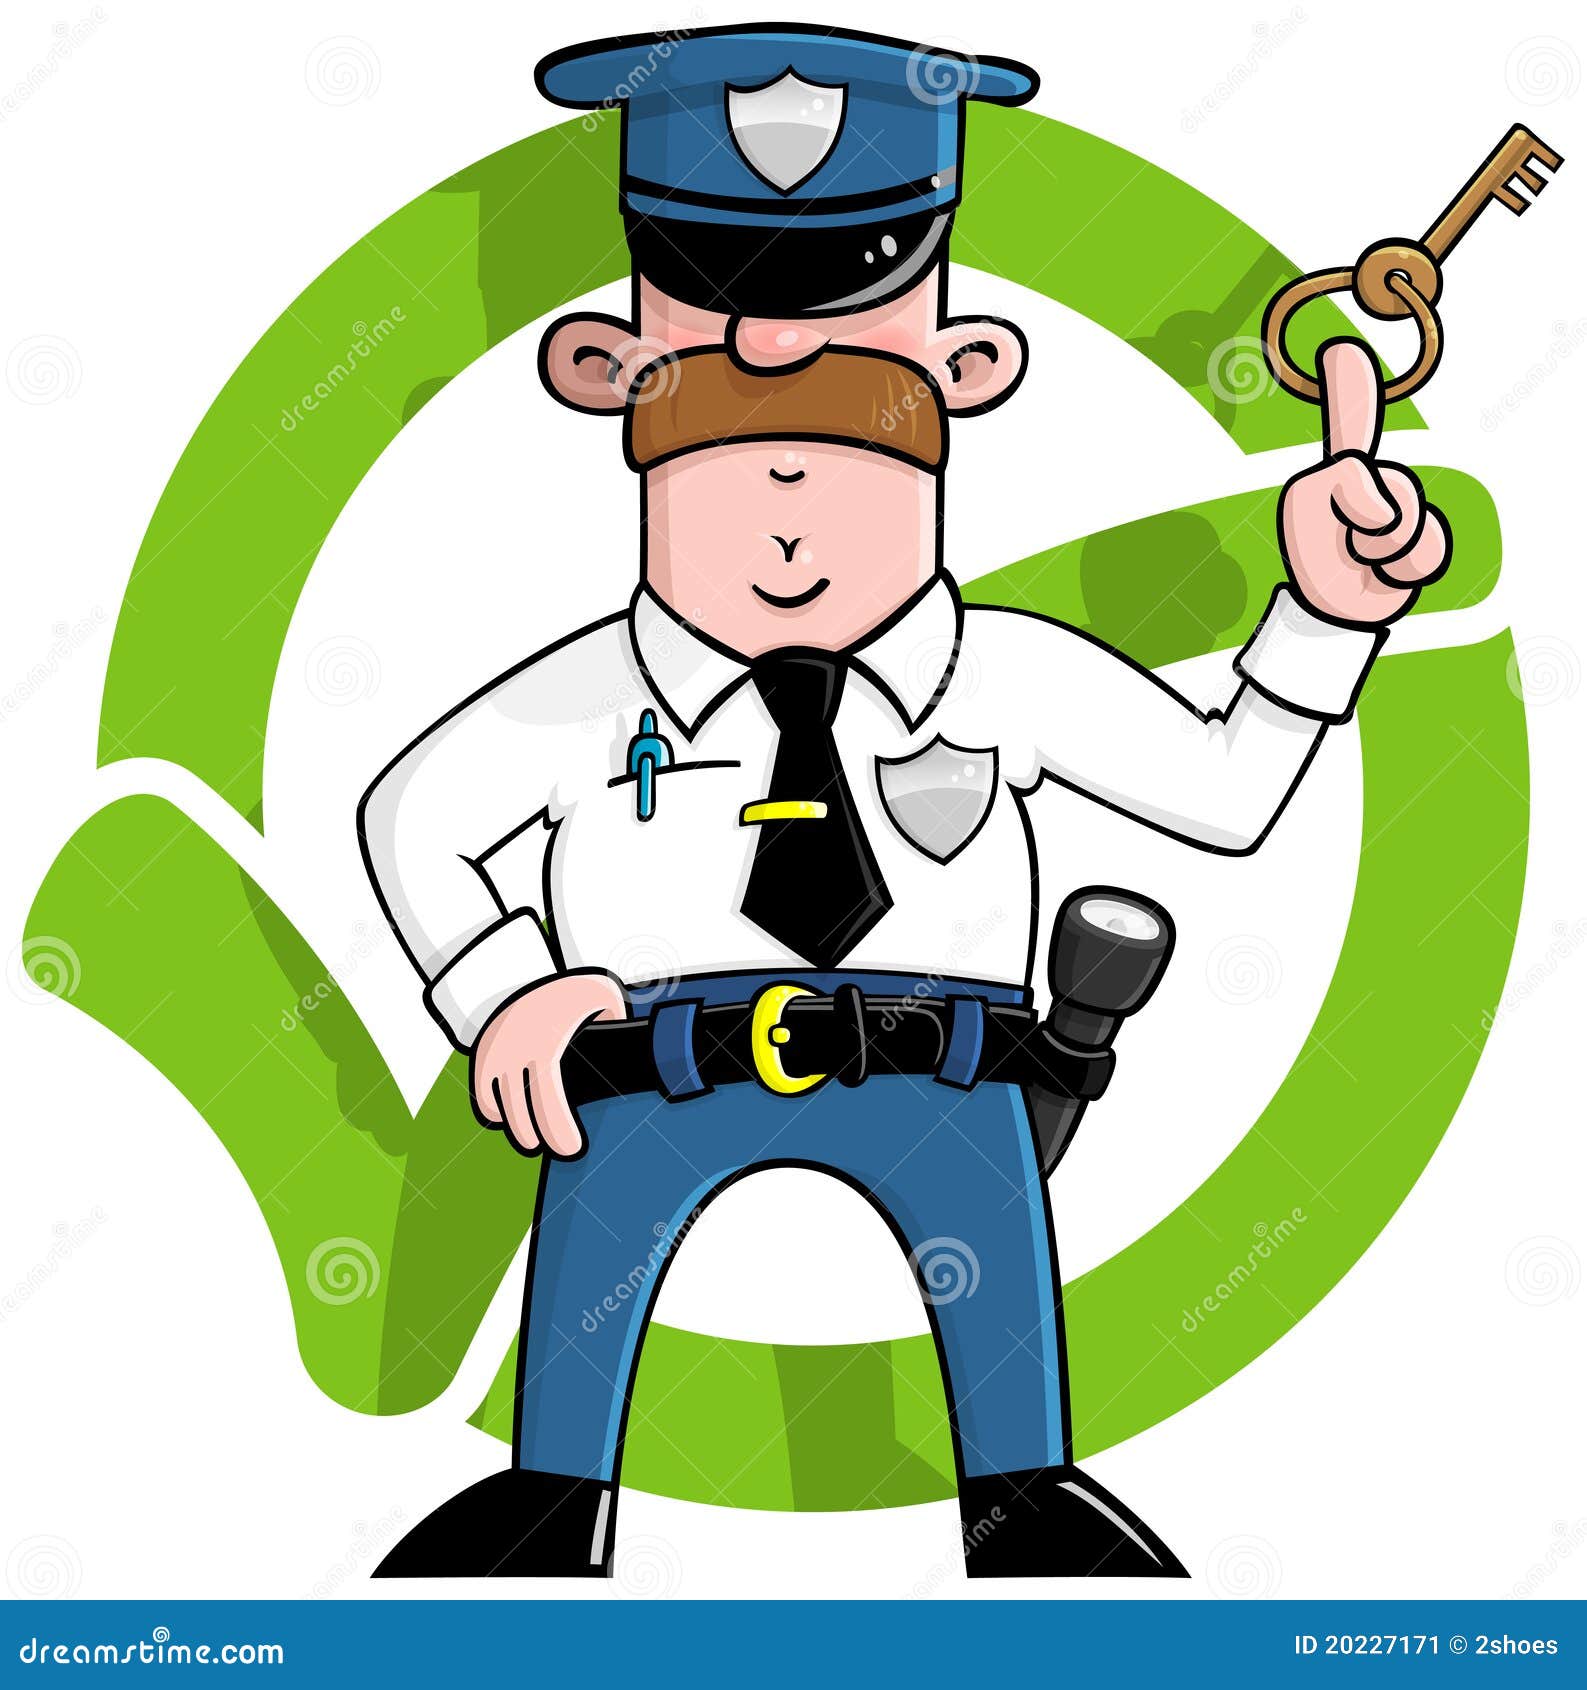 clipart for security - photo #44